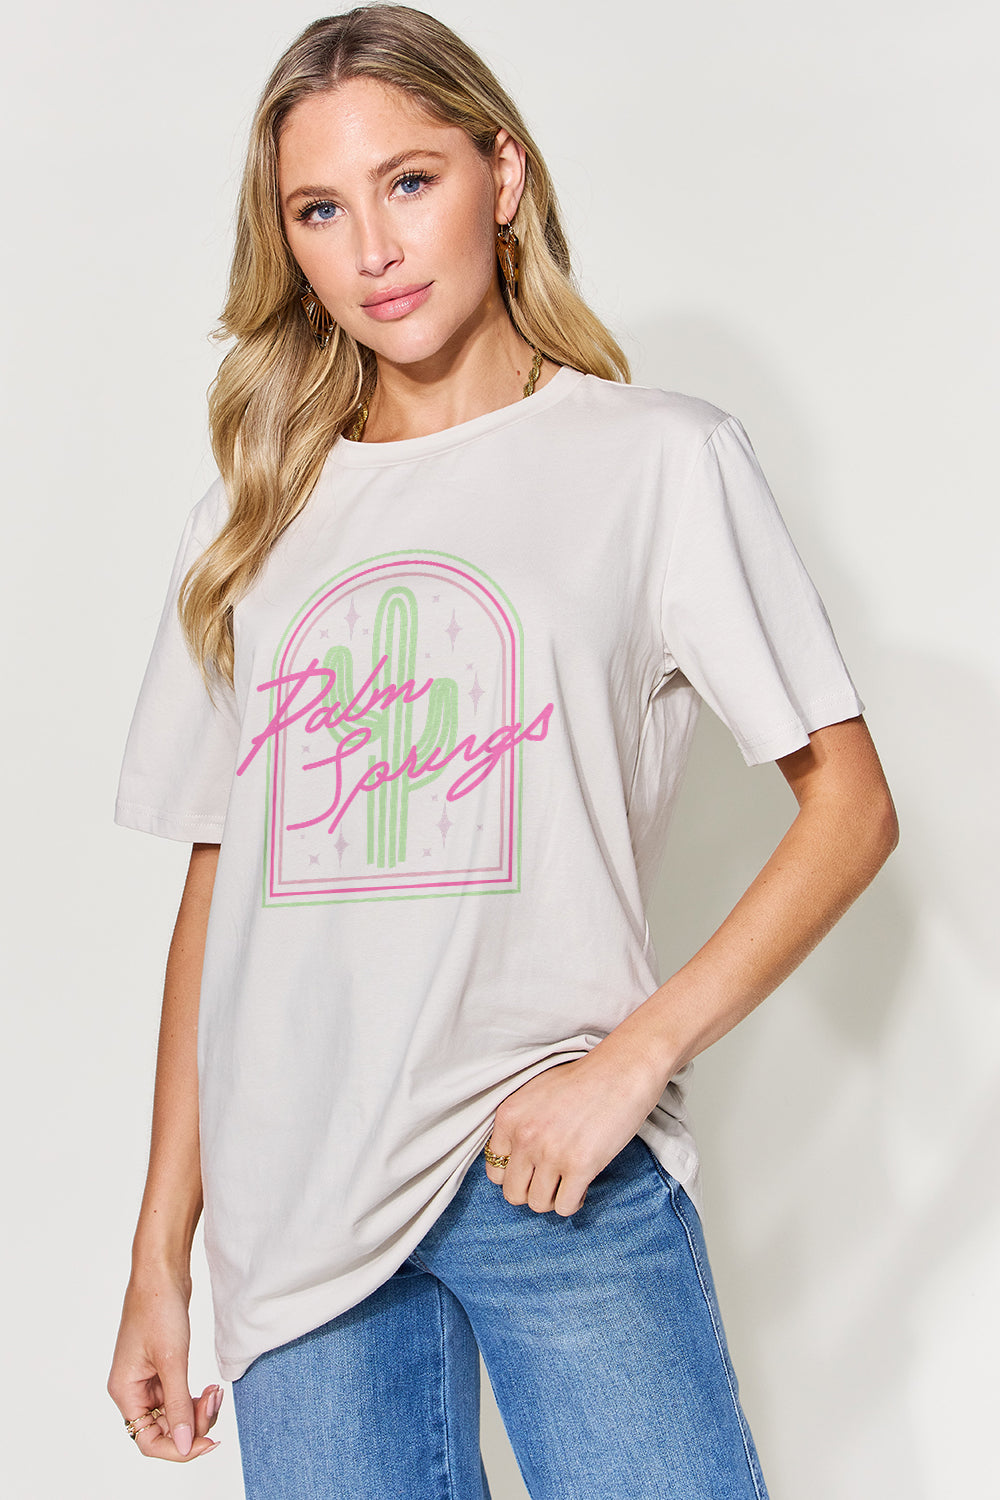 Simply Love Full Size Graphic Short Sleeve T-Shirt